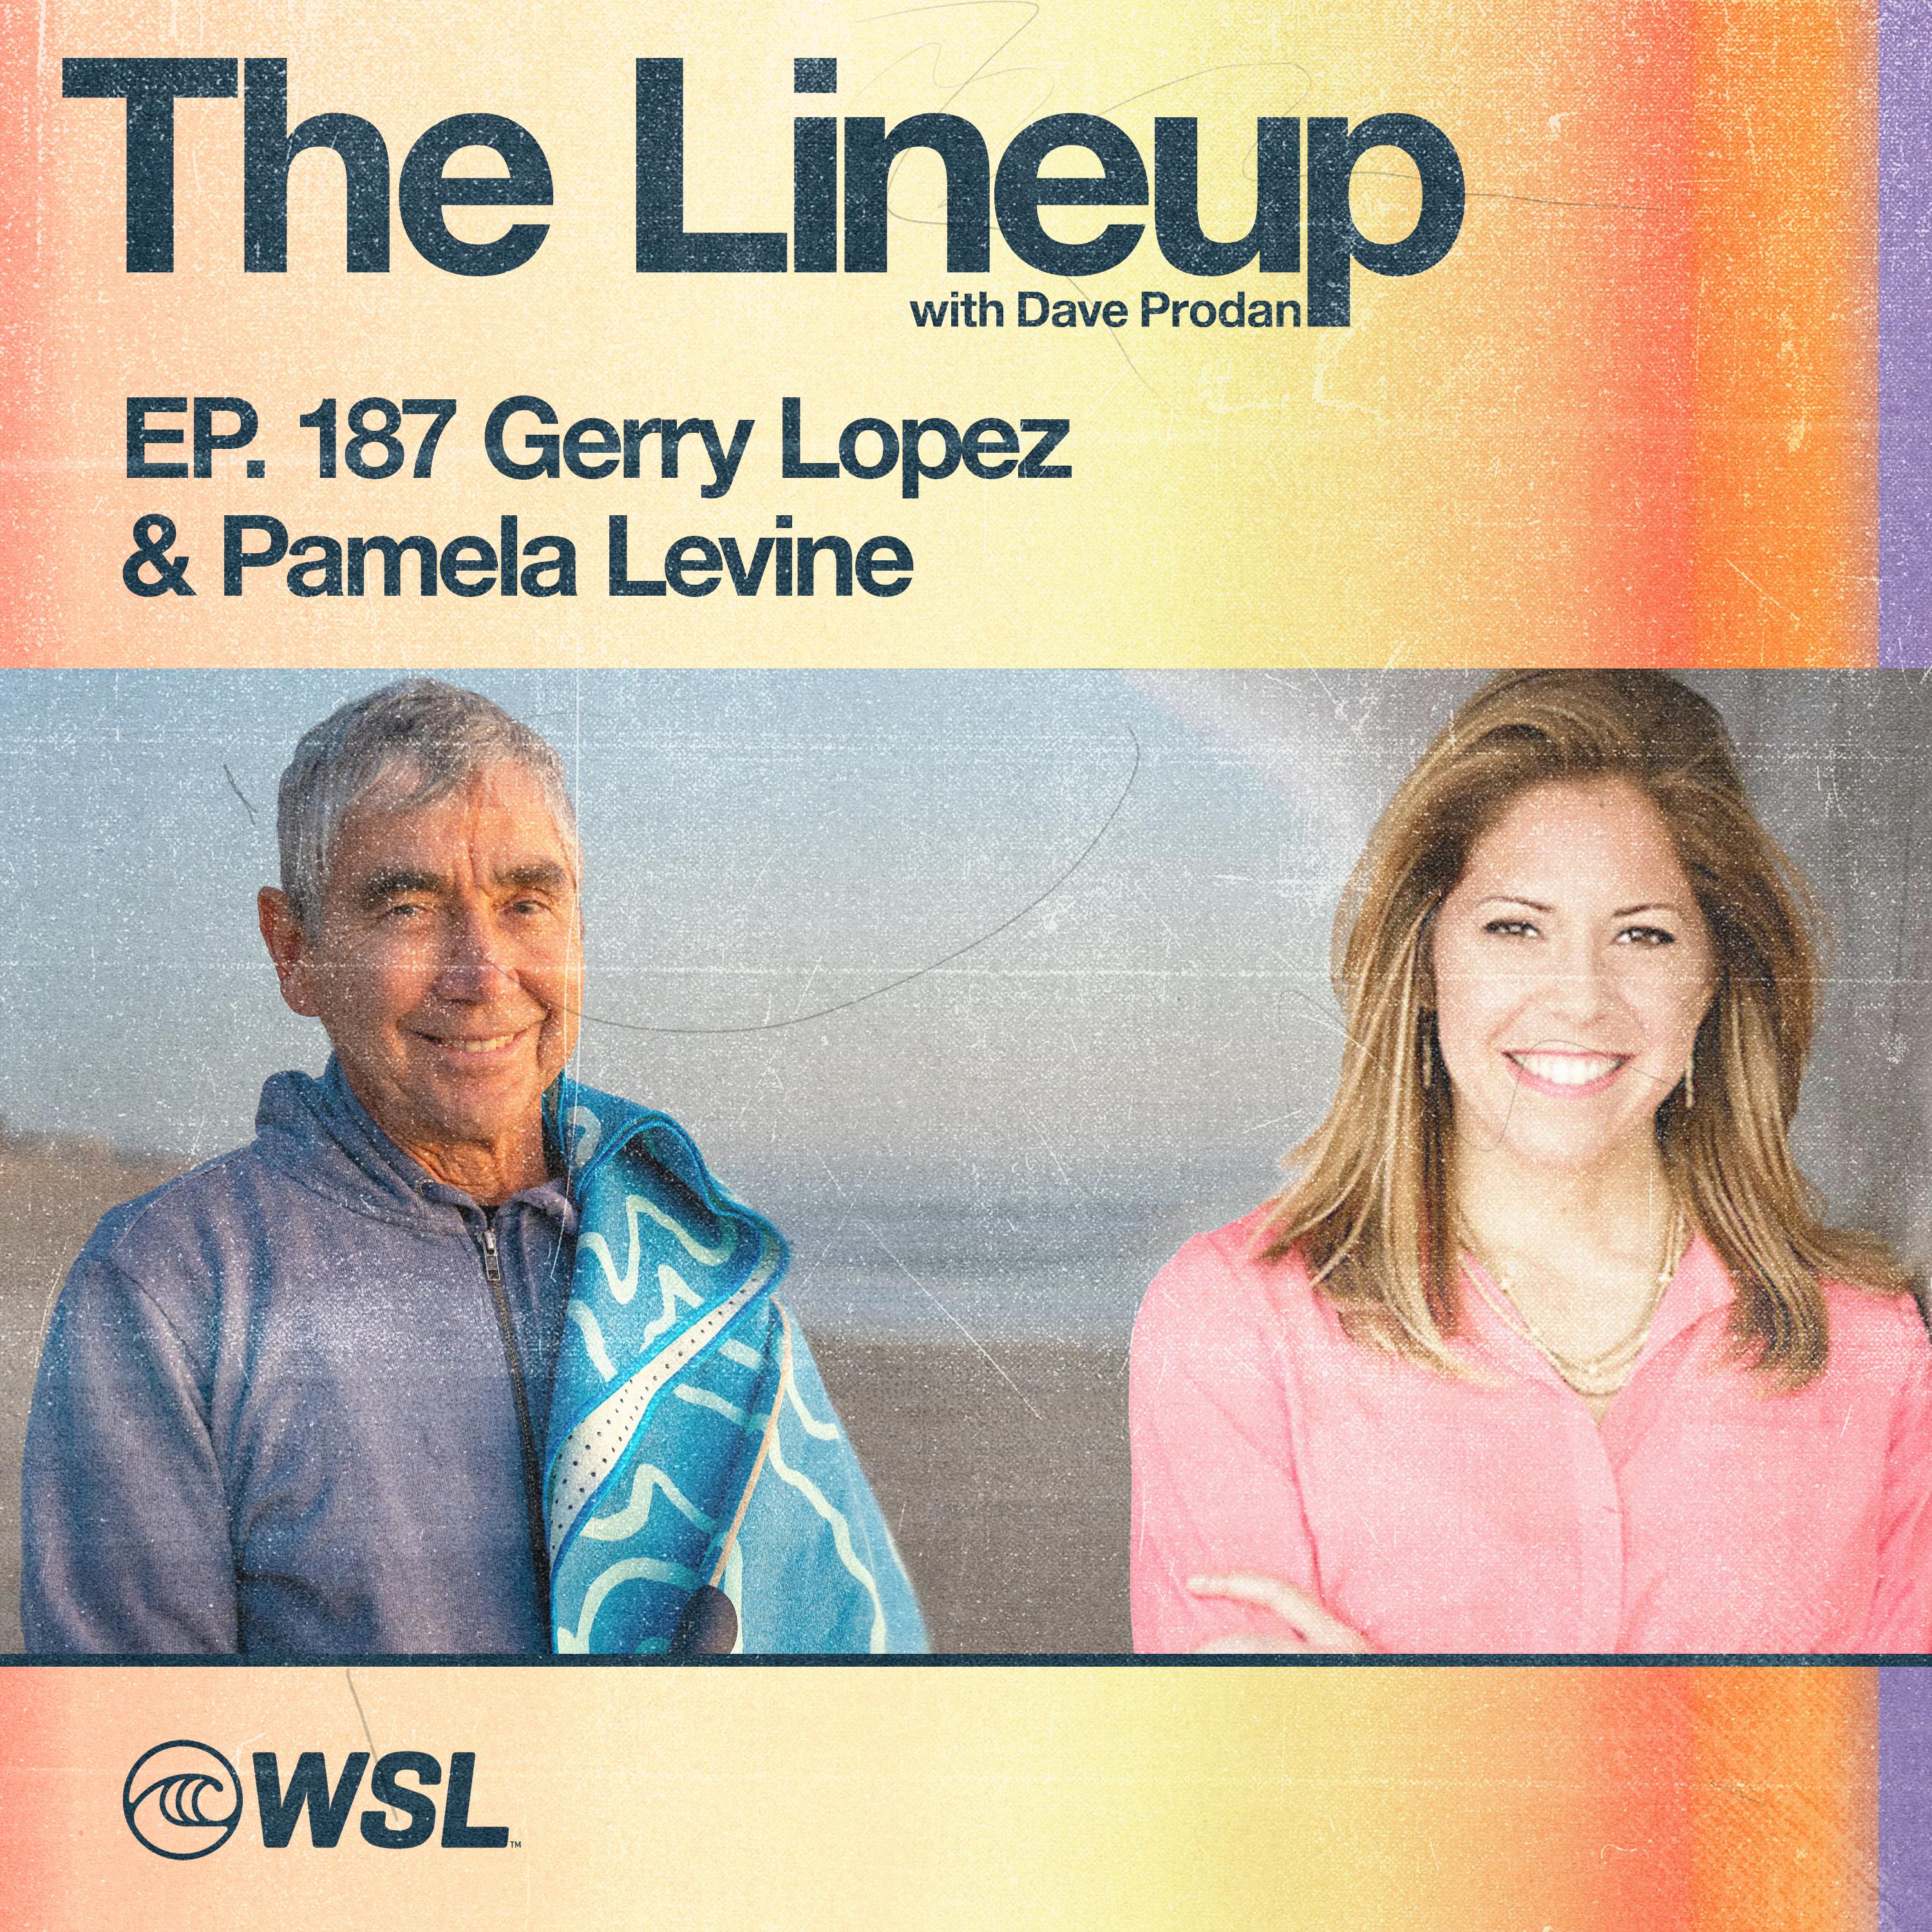 EP 187: Gerry Lopez & Pamela Levine - The intersection of Yoga and Surfing, Their new partnership with Manduka, Pamela’s focus as CEO of Manduka, Solving the climate crisis through Yoga, Where to st